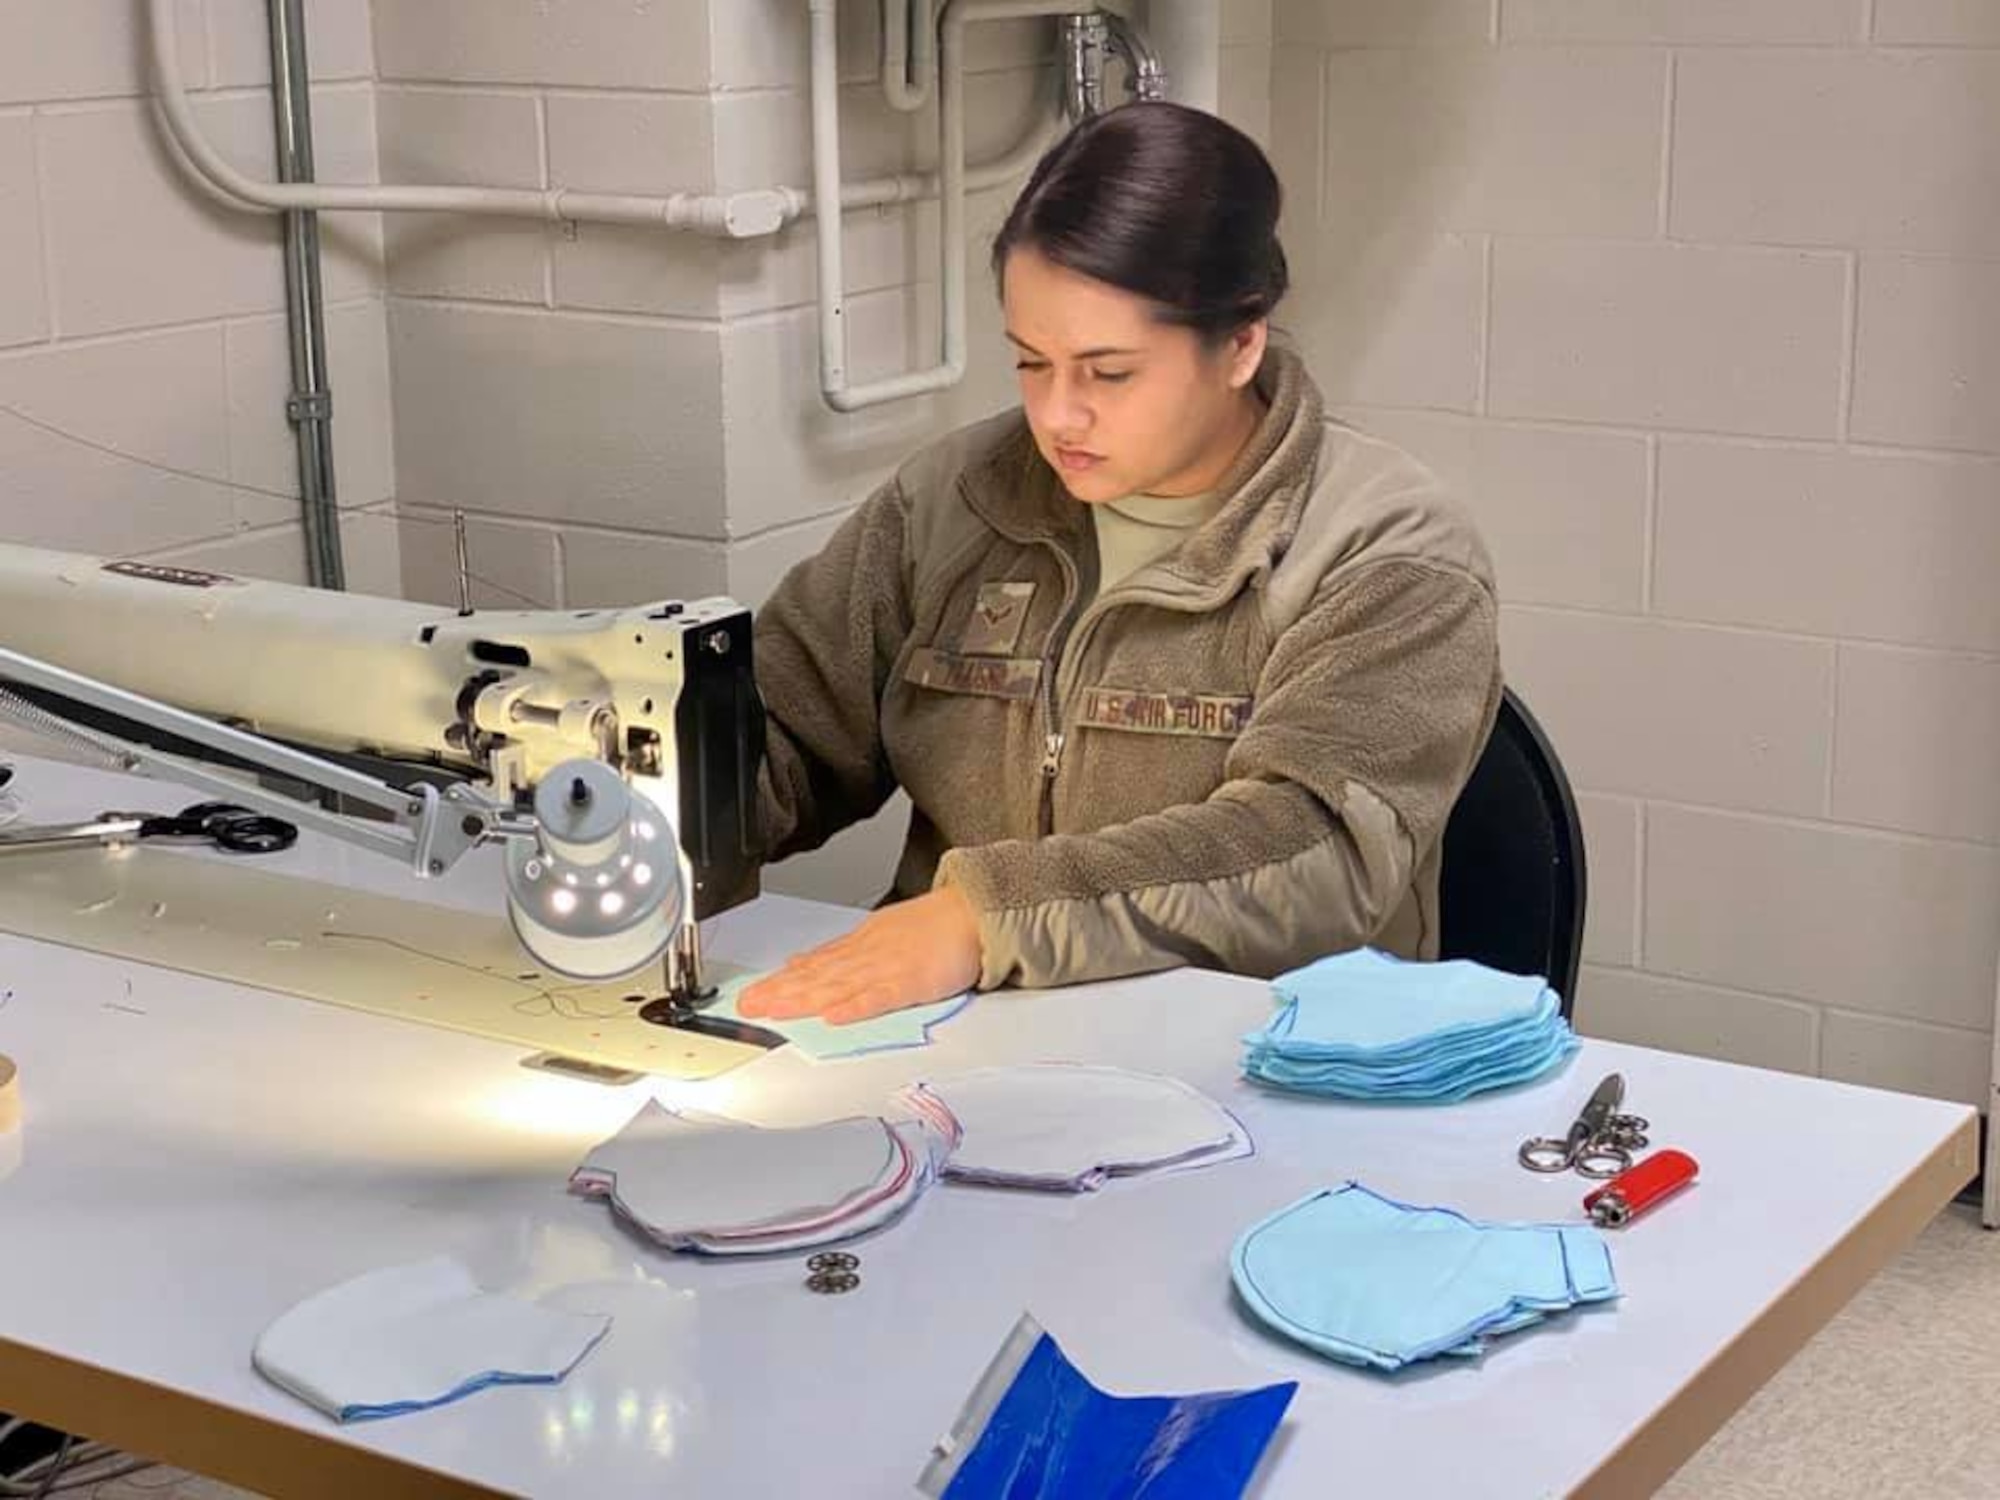 An Aircrew Flight Equipment specialist from the Duluth-based 148th Fighter Wing, Minnesota Air National Guard sews protective masks for mission essential military personnel.  Airmen from various work groups from the wing are cutting fabric, laundering masks and disseminating the completed masks.  Airmen are utilizing innovative ways to slow the spread of COVID-19.